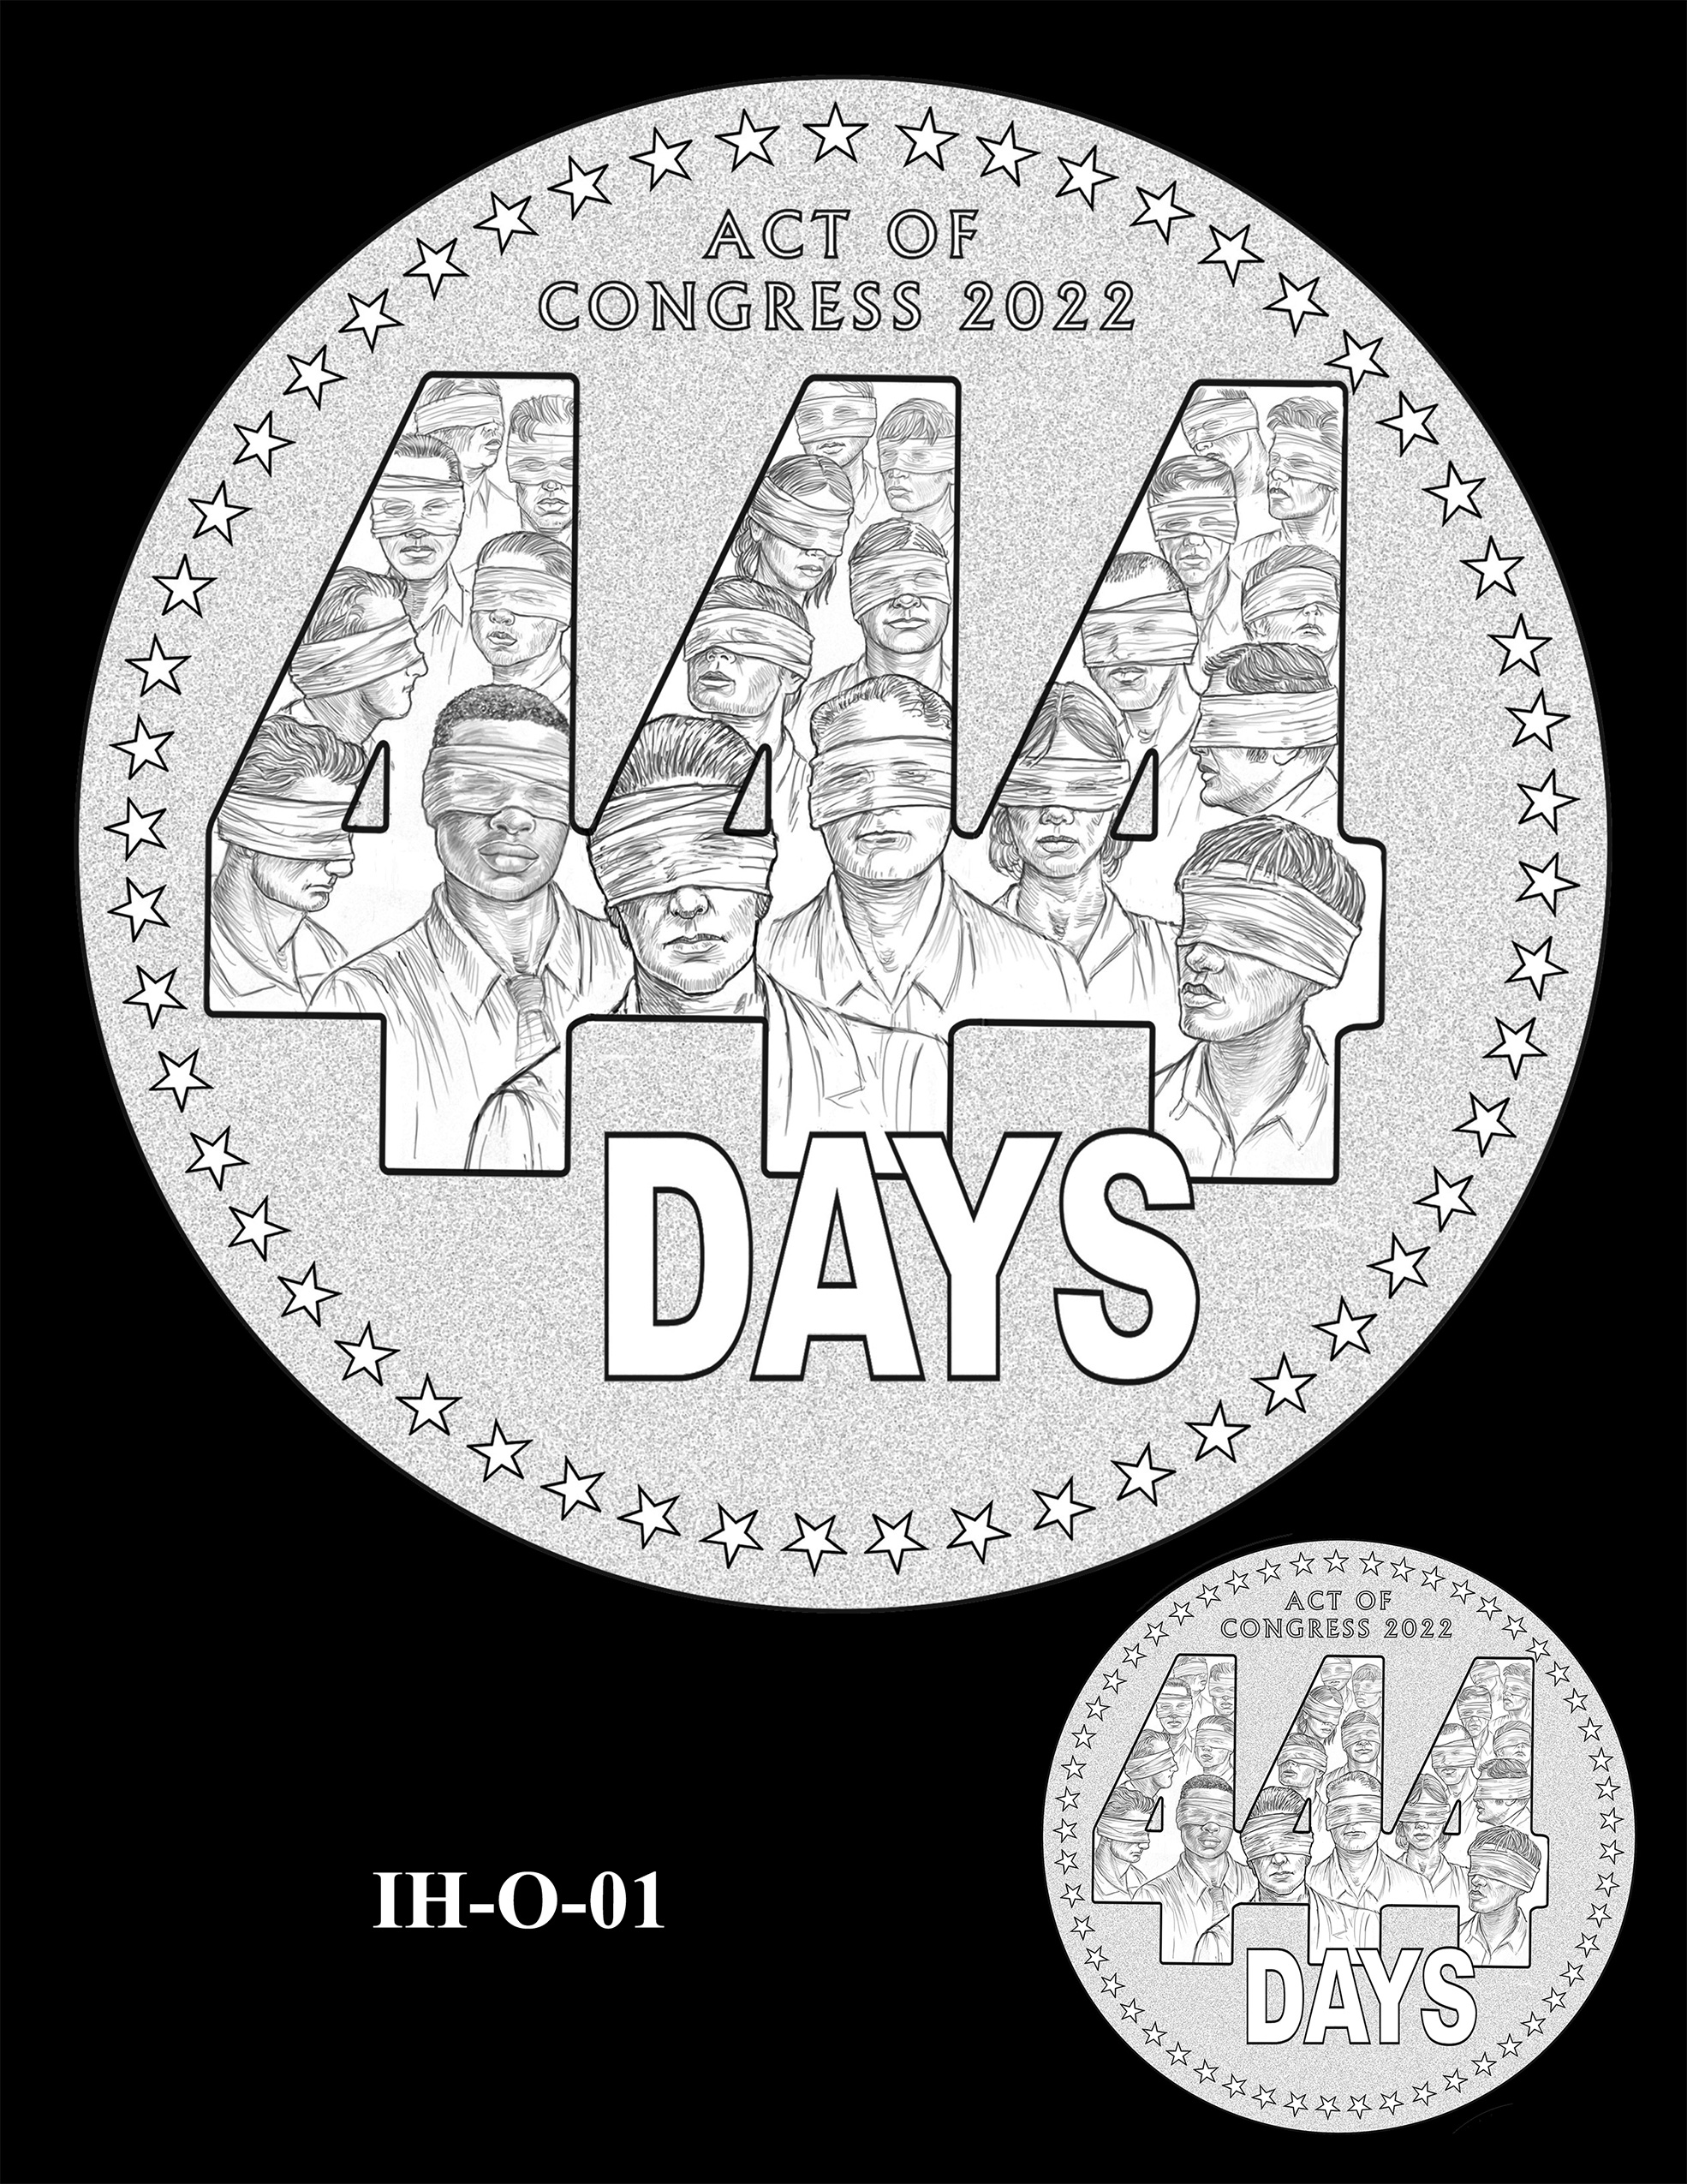 IH-O-01 -- Iran Hostages Congressional Gold Medal